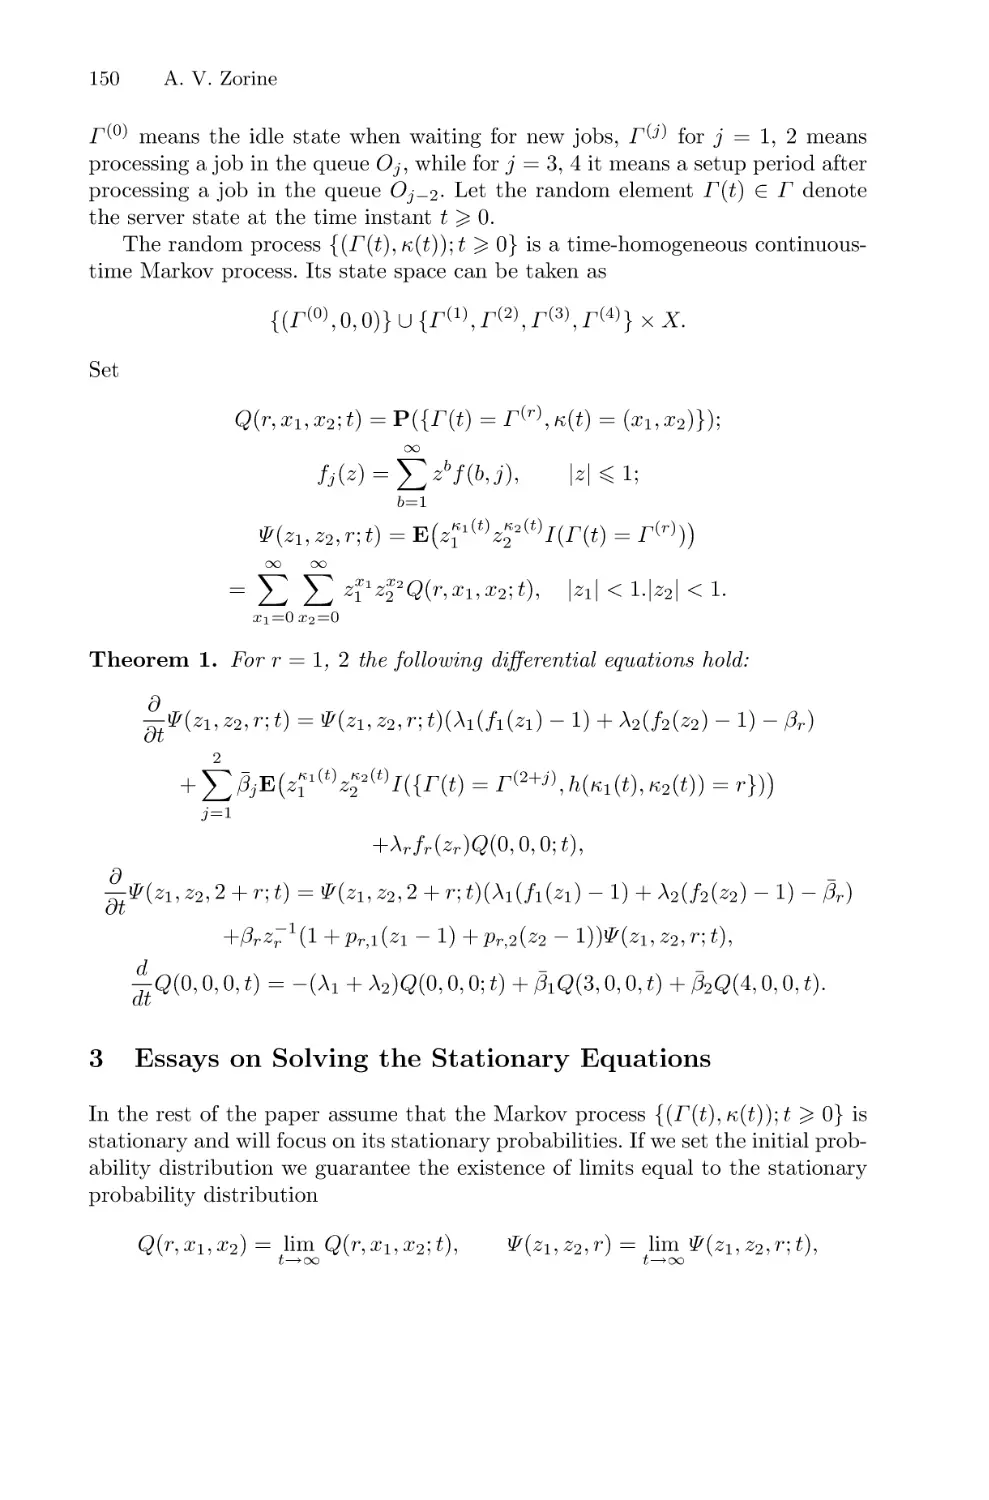 3 Essays on Solving the Stationary Equations